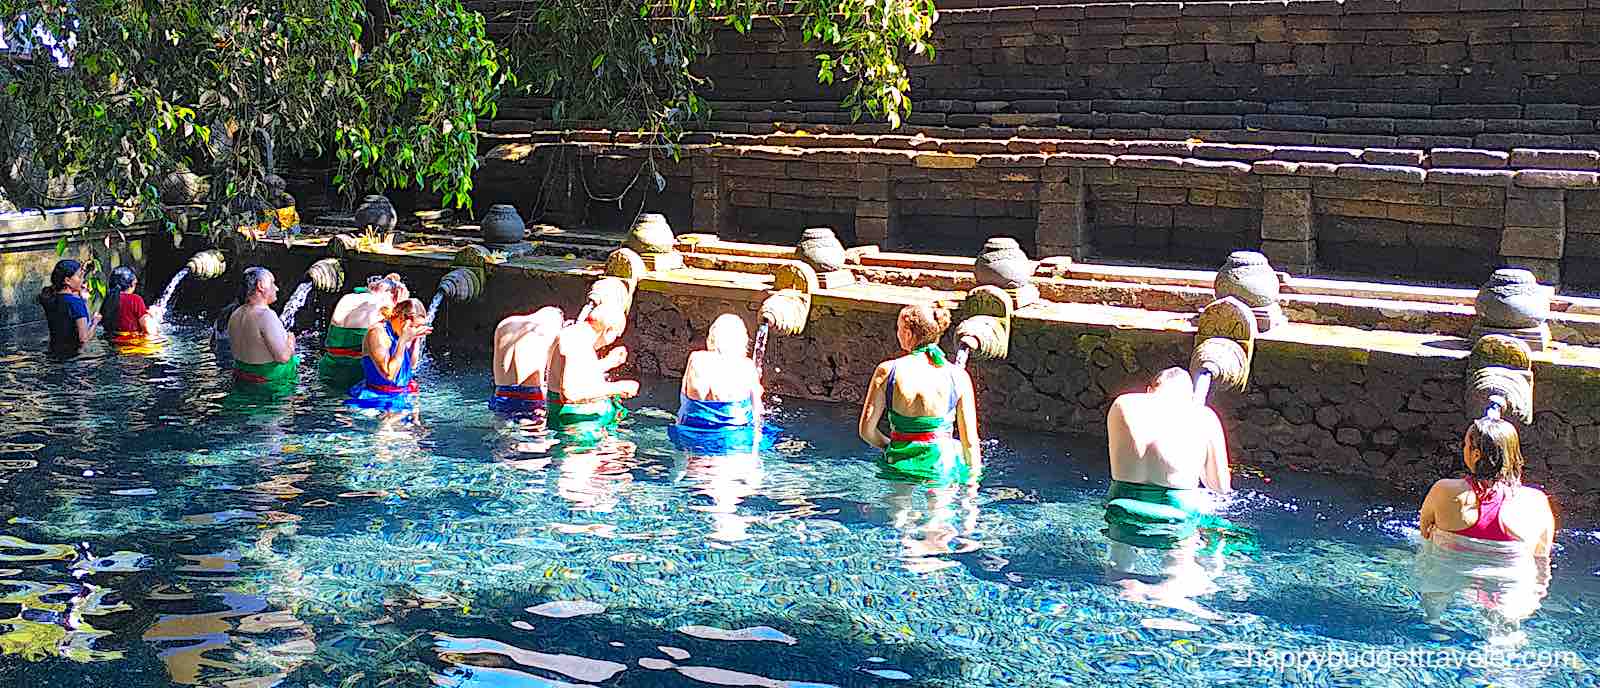 Picture of the holy spring water bathing structure at Tirta Empul, Tampaksiring, Bali